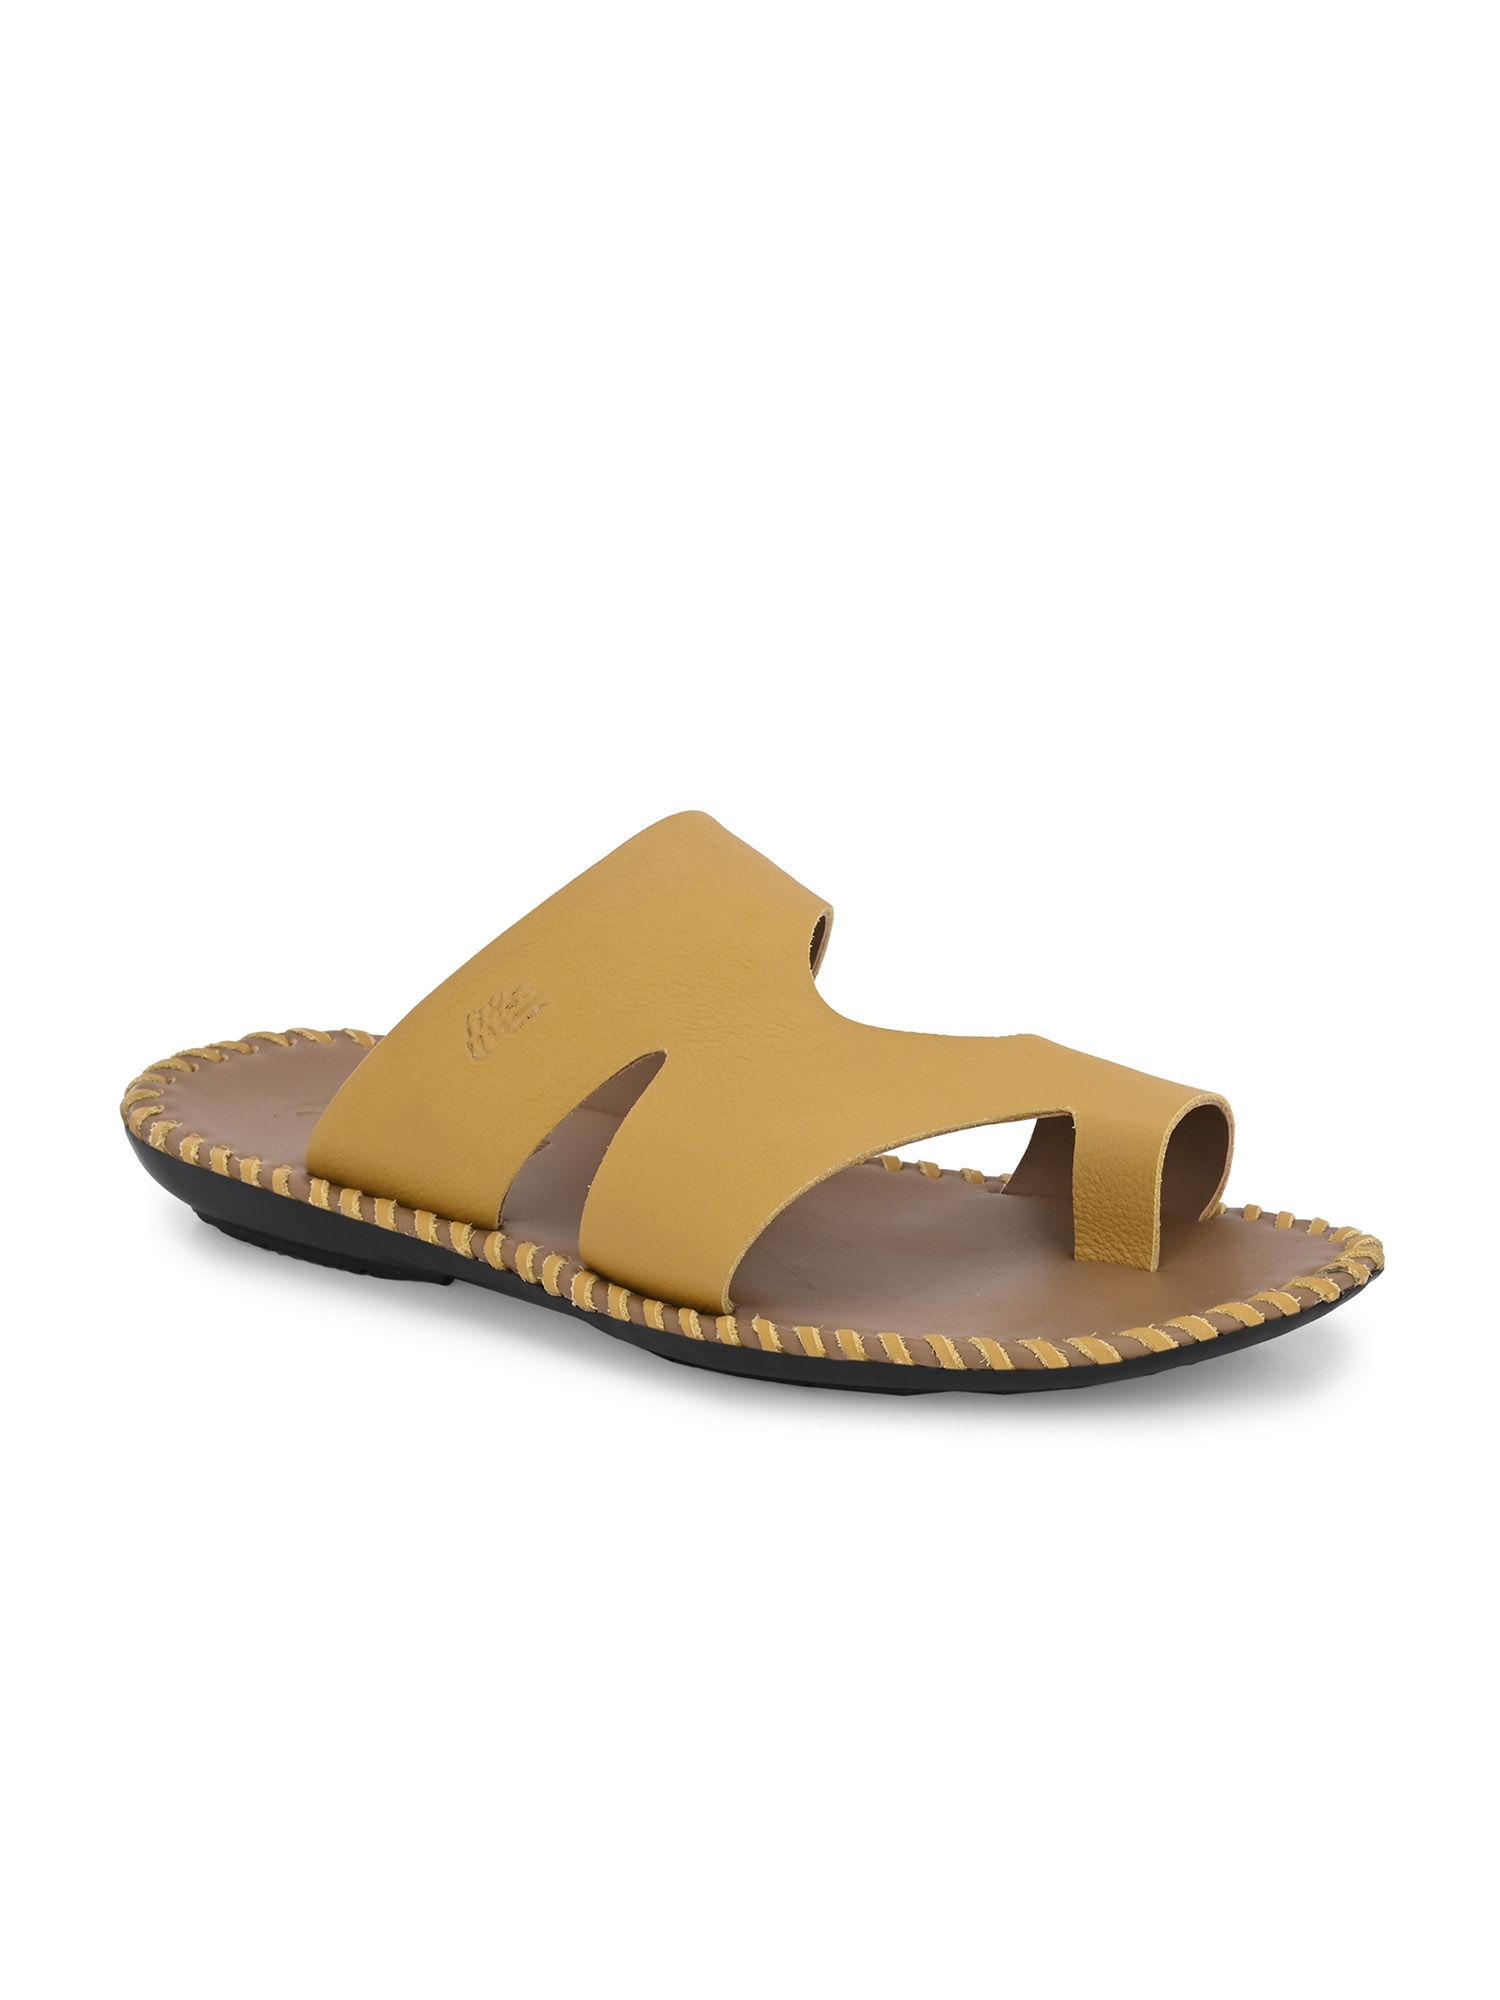 men's yellow leather casual toe-ring slippers